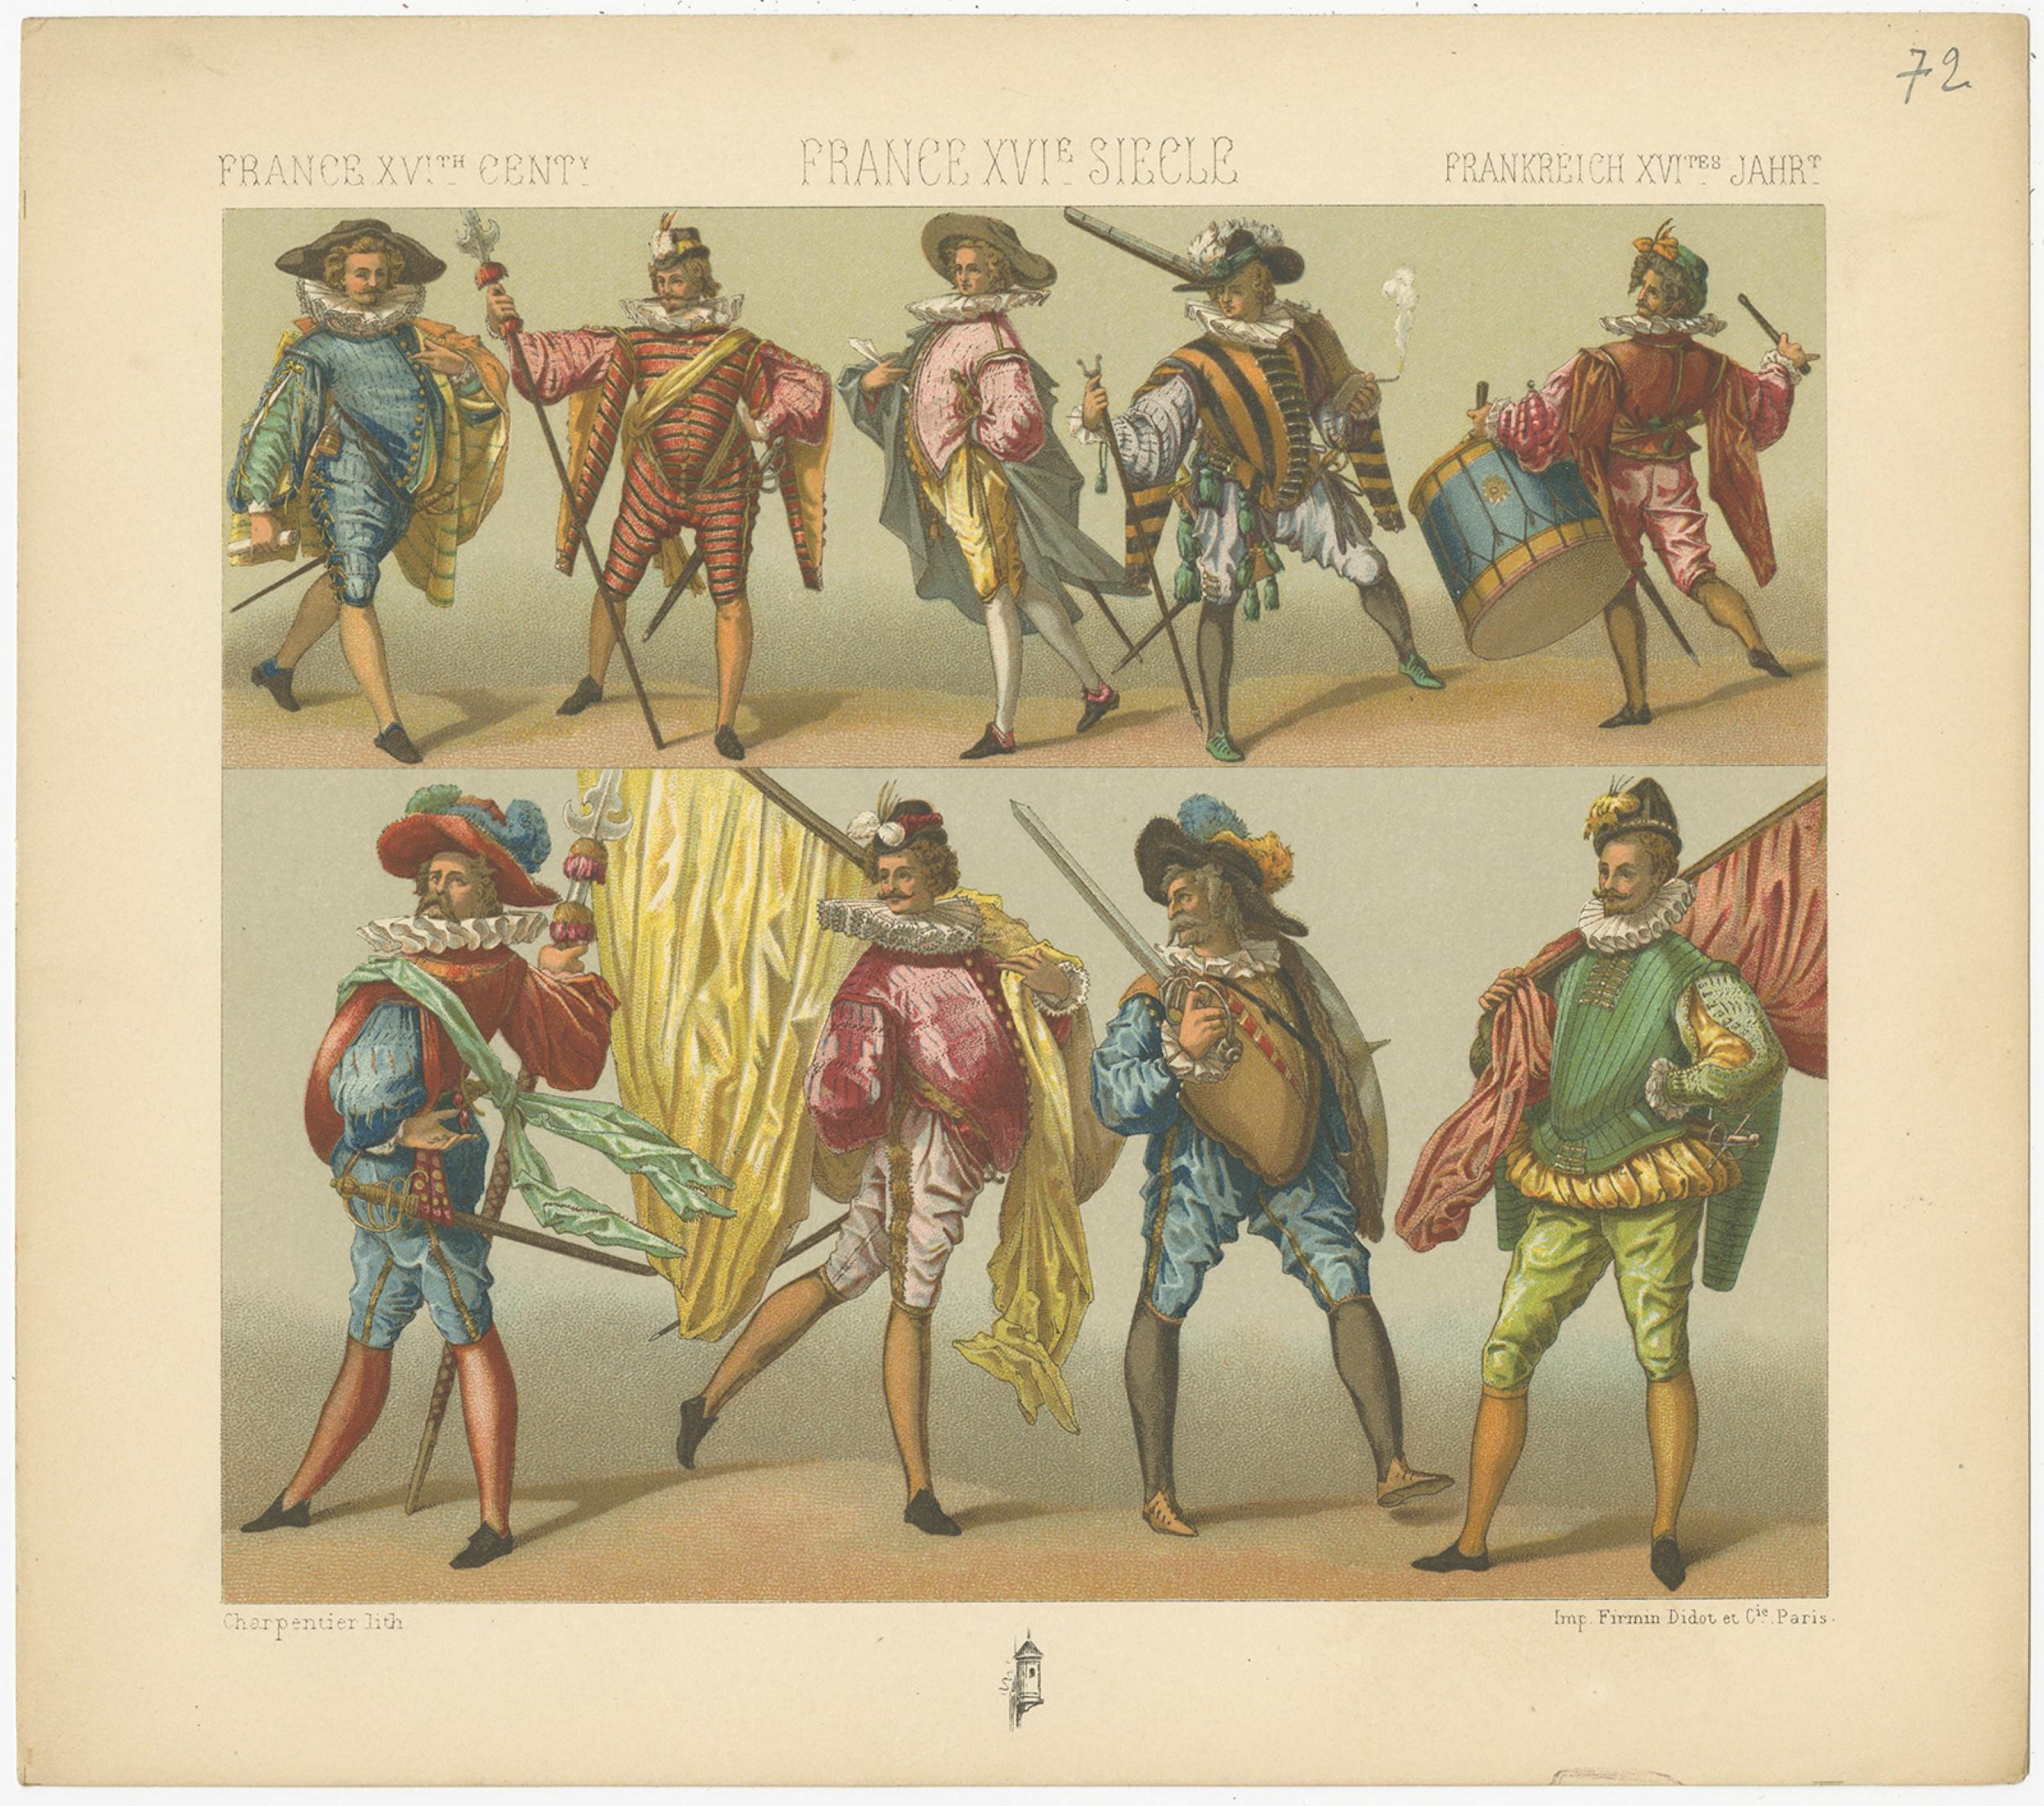 Antique print titled 'France XVI Cent - France XVIe Siecle - FrankreichXVItes Jahr'. Chromolithograph of French XVIth Century Costumes. This print originates from 'Le Costume Historique' by M.A. Racinet. Published, circa 1880.